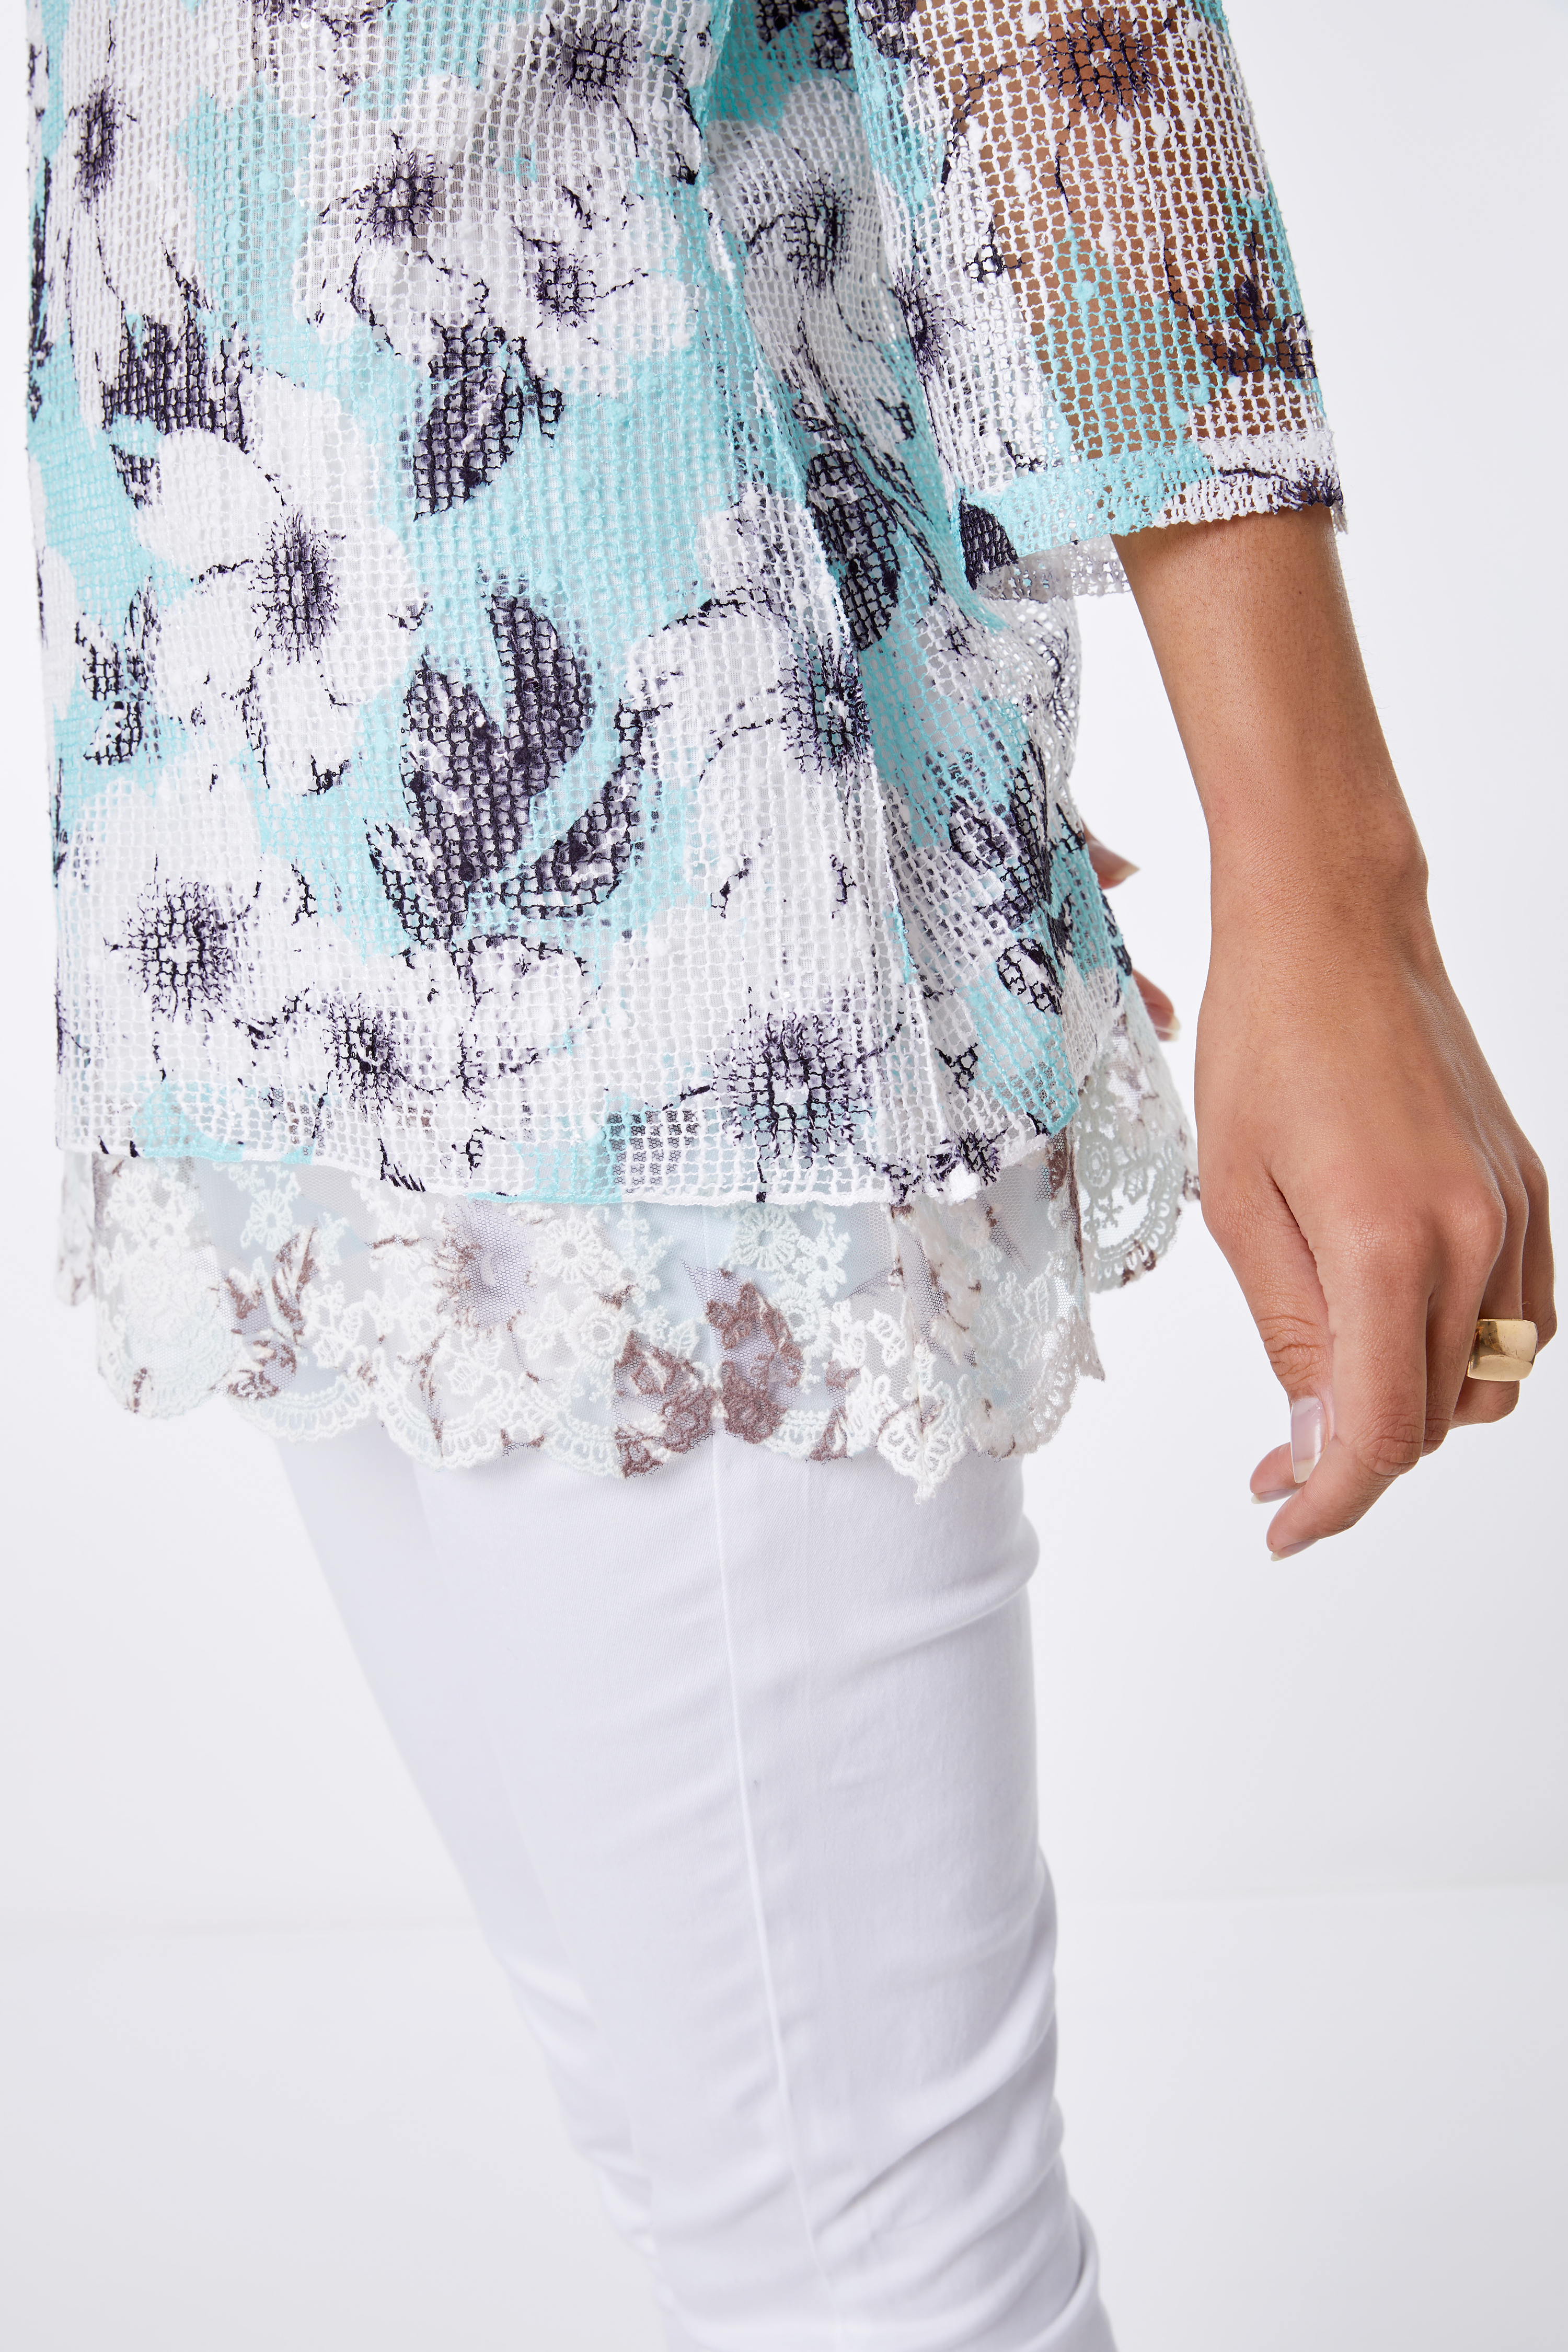 Mint Lace Trim Overlay Floral Print Top, Image 5 of 5